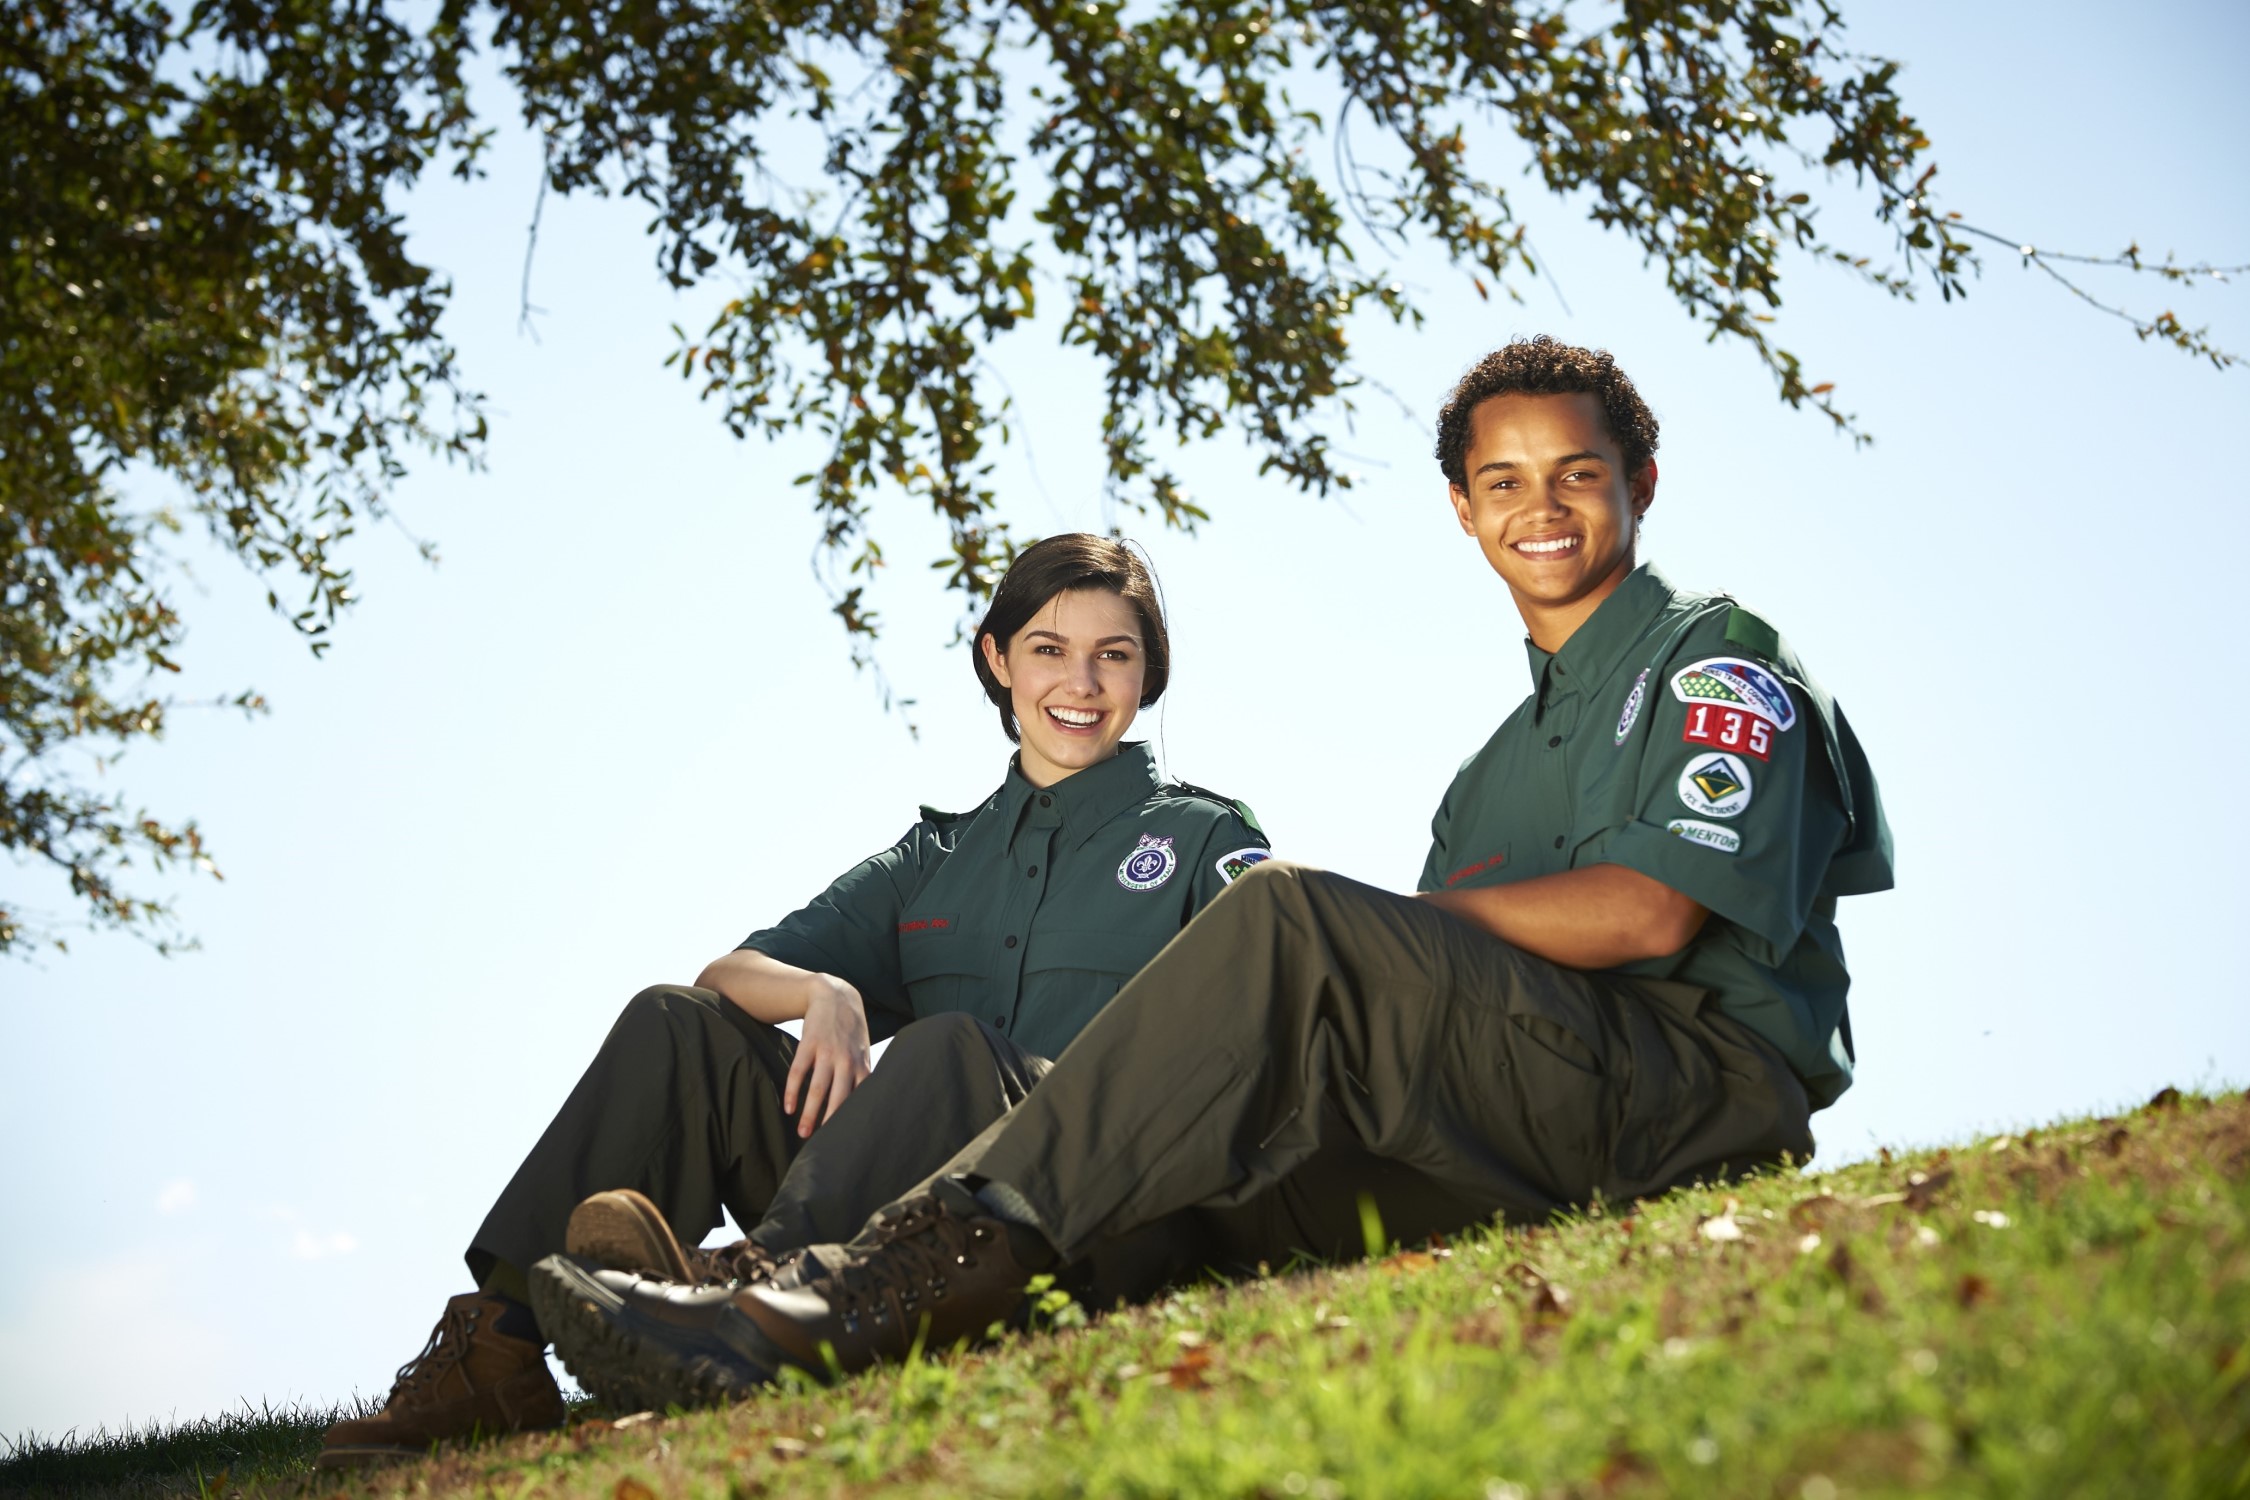 Two older youth (around age 16), a man and a woman, wearing the Venturing uniform smile while sitting on a grassy hill